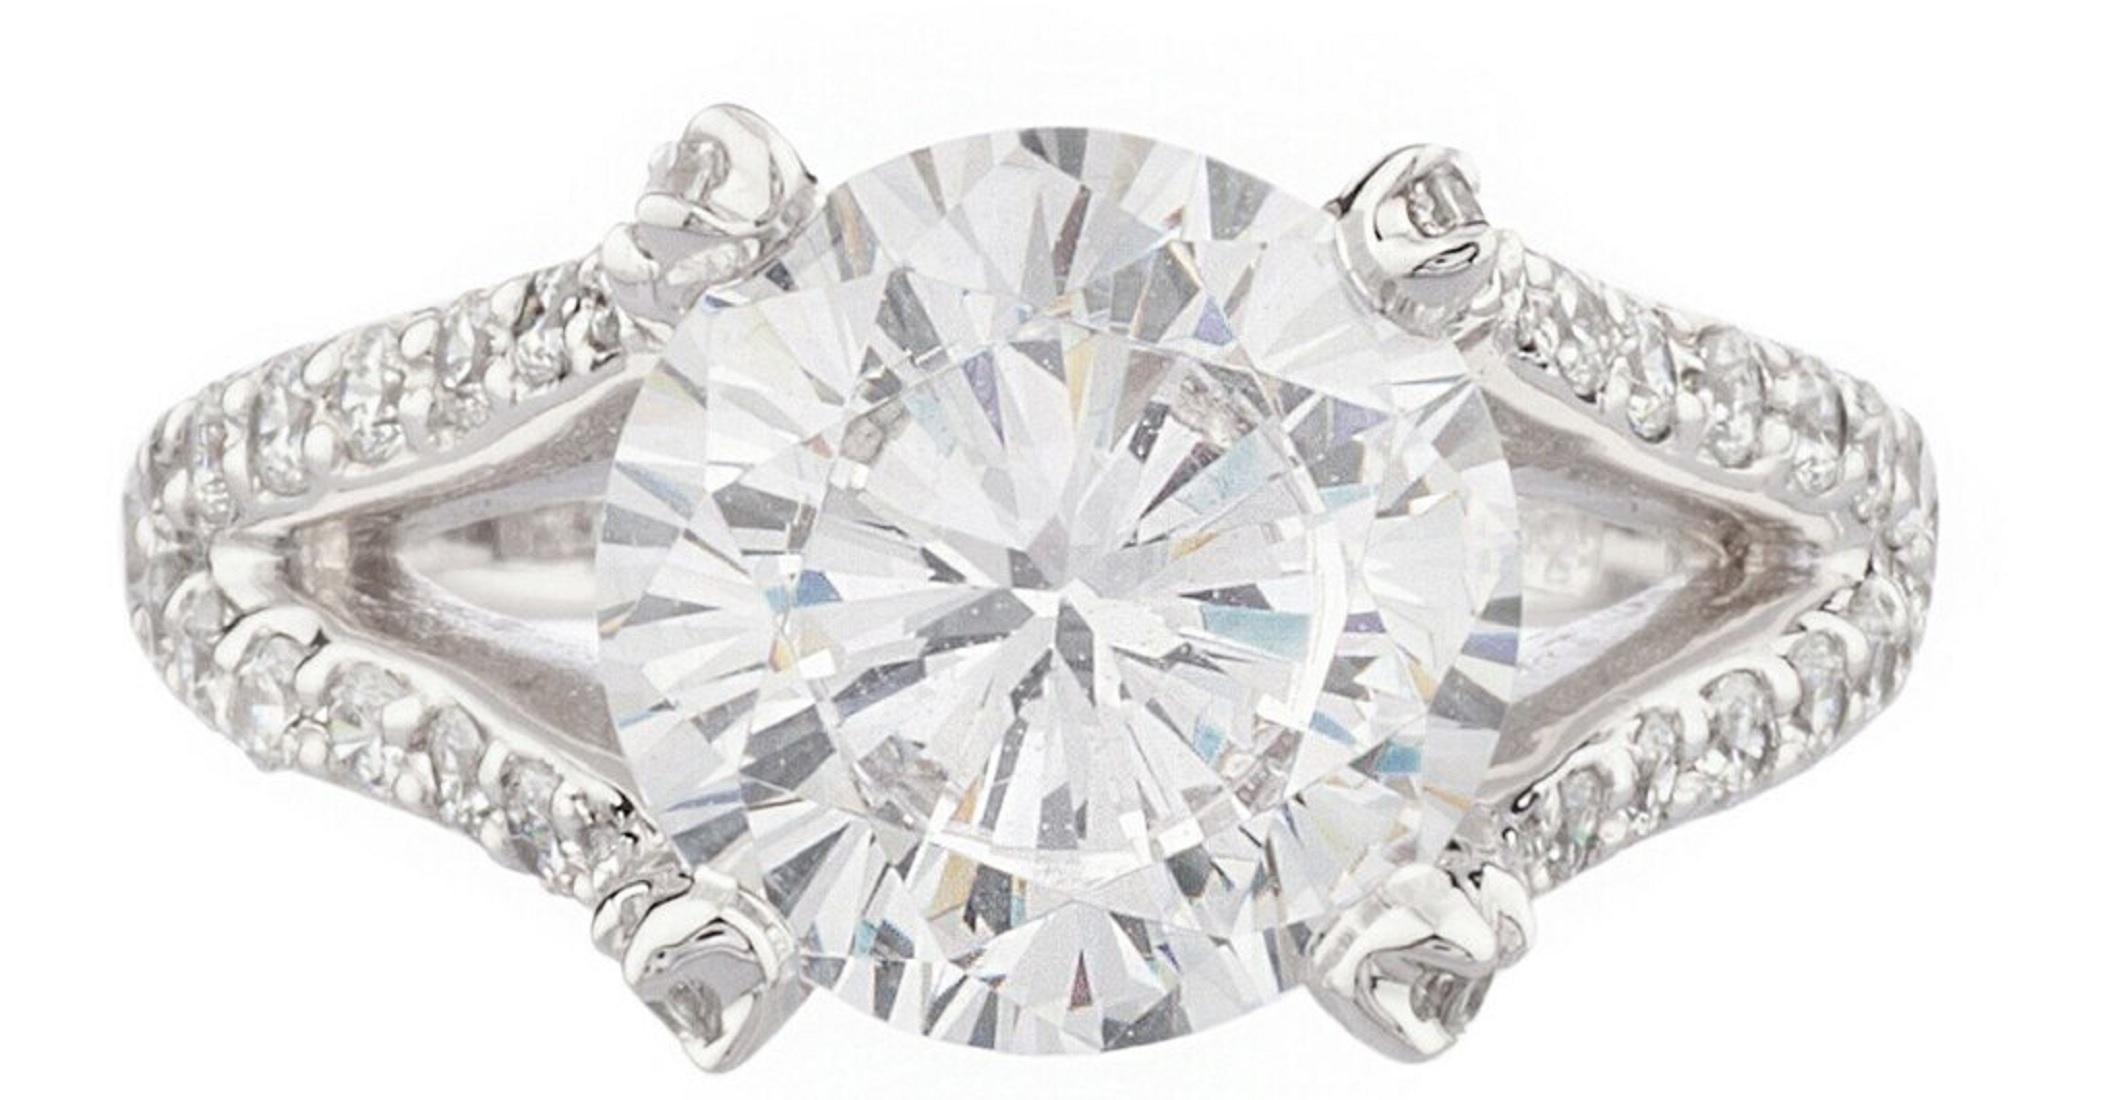 This exquisite GIA 4 Carat Round Brilliant Cut Diamond has a beautiful open shank pave of natural brilliant cut diamonds with a total weight of 1 carats